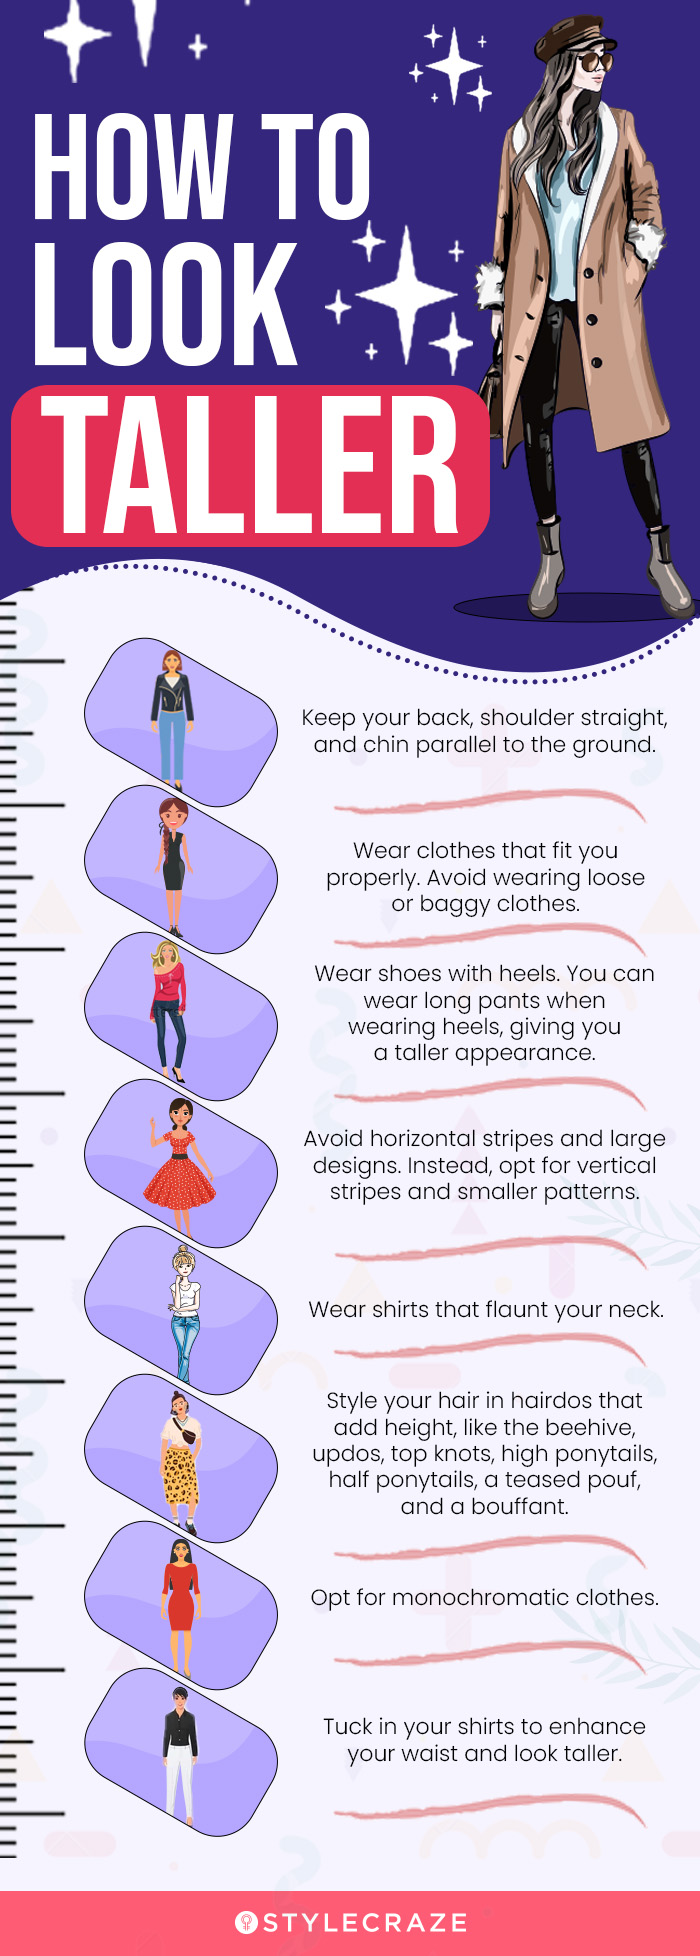 how to look taller (infographic)